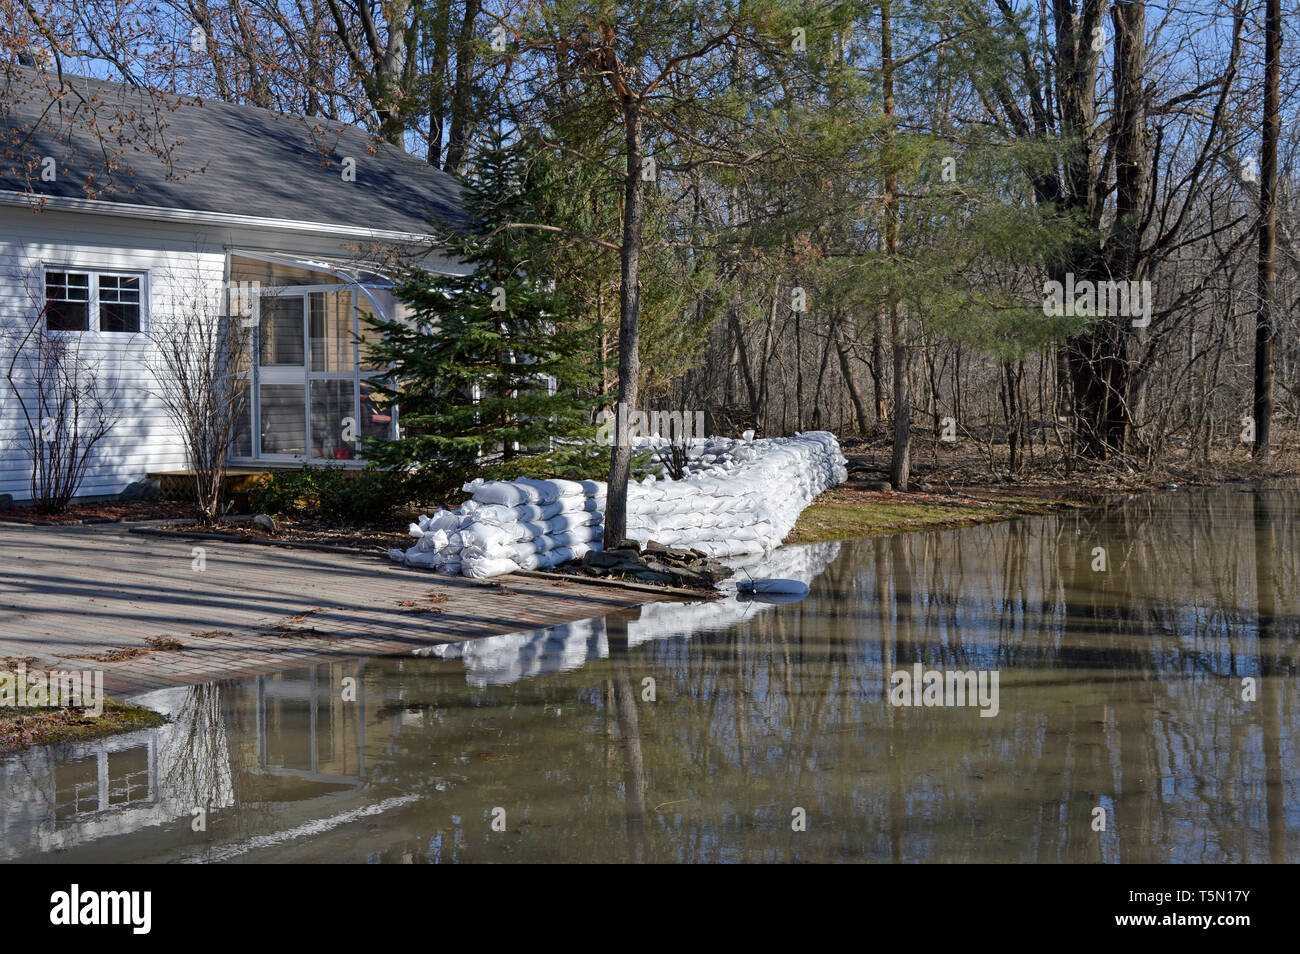 A wall of sand bags protects a lonely home in a forest in Gatineau, Quebec Stock Photo